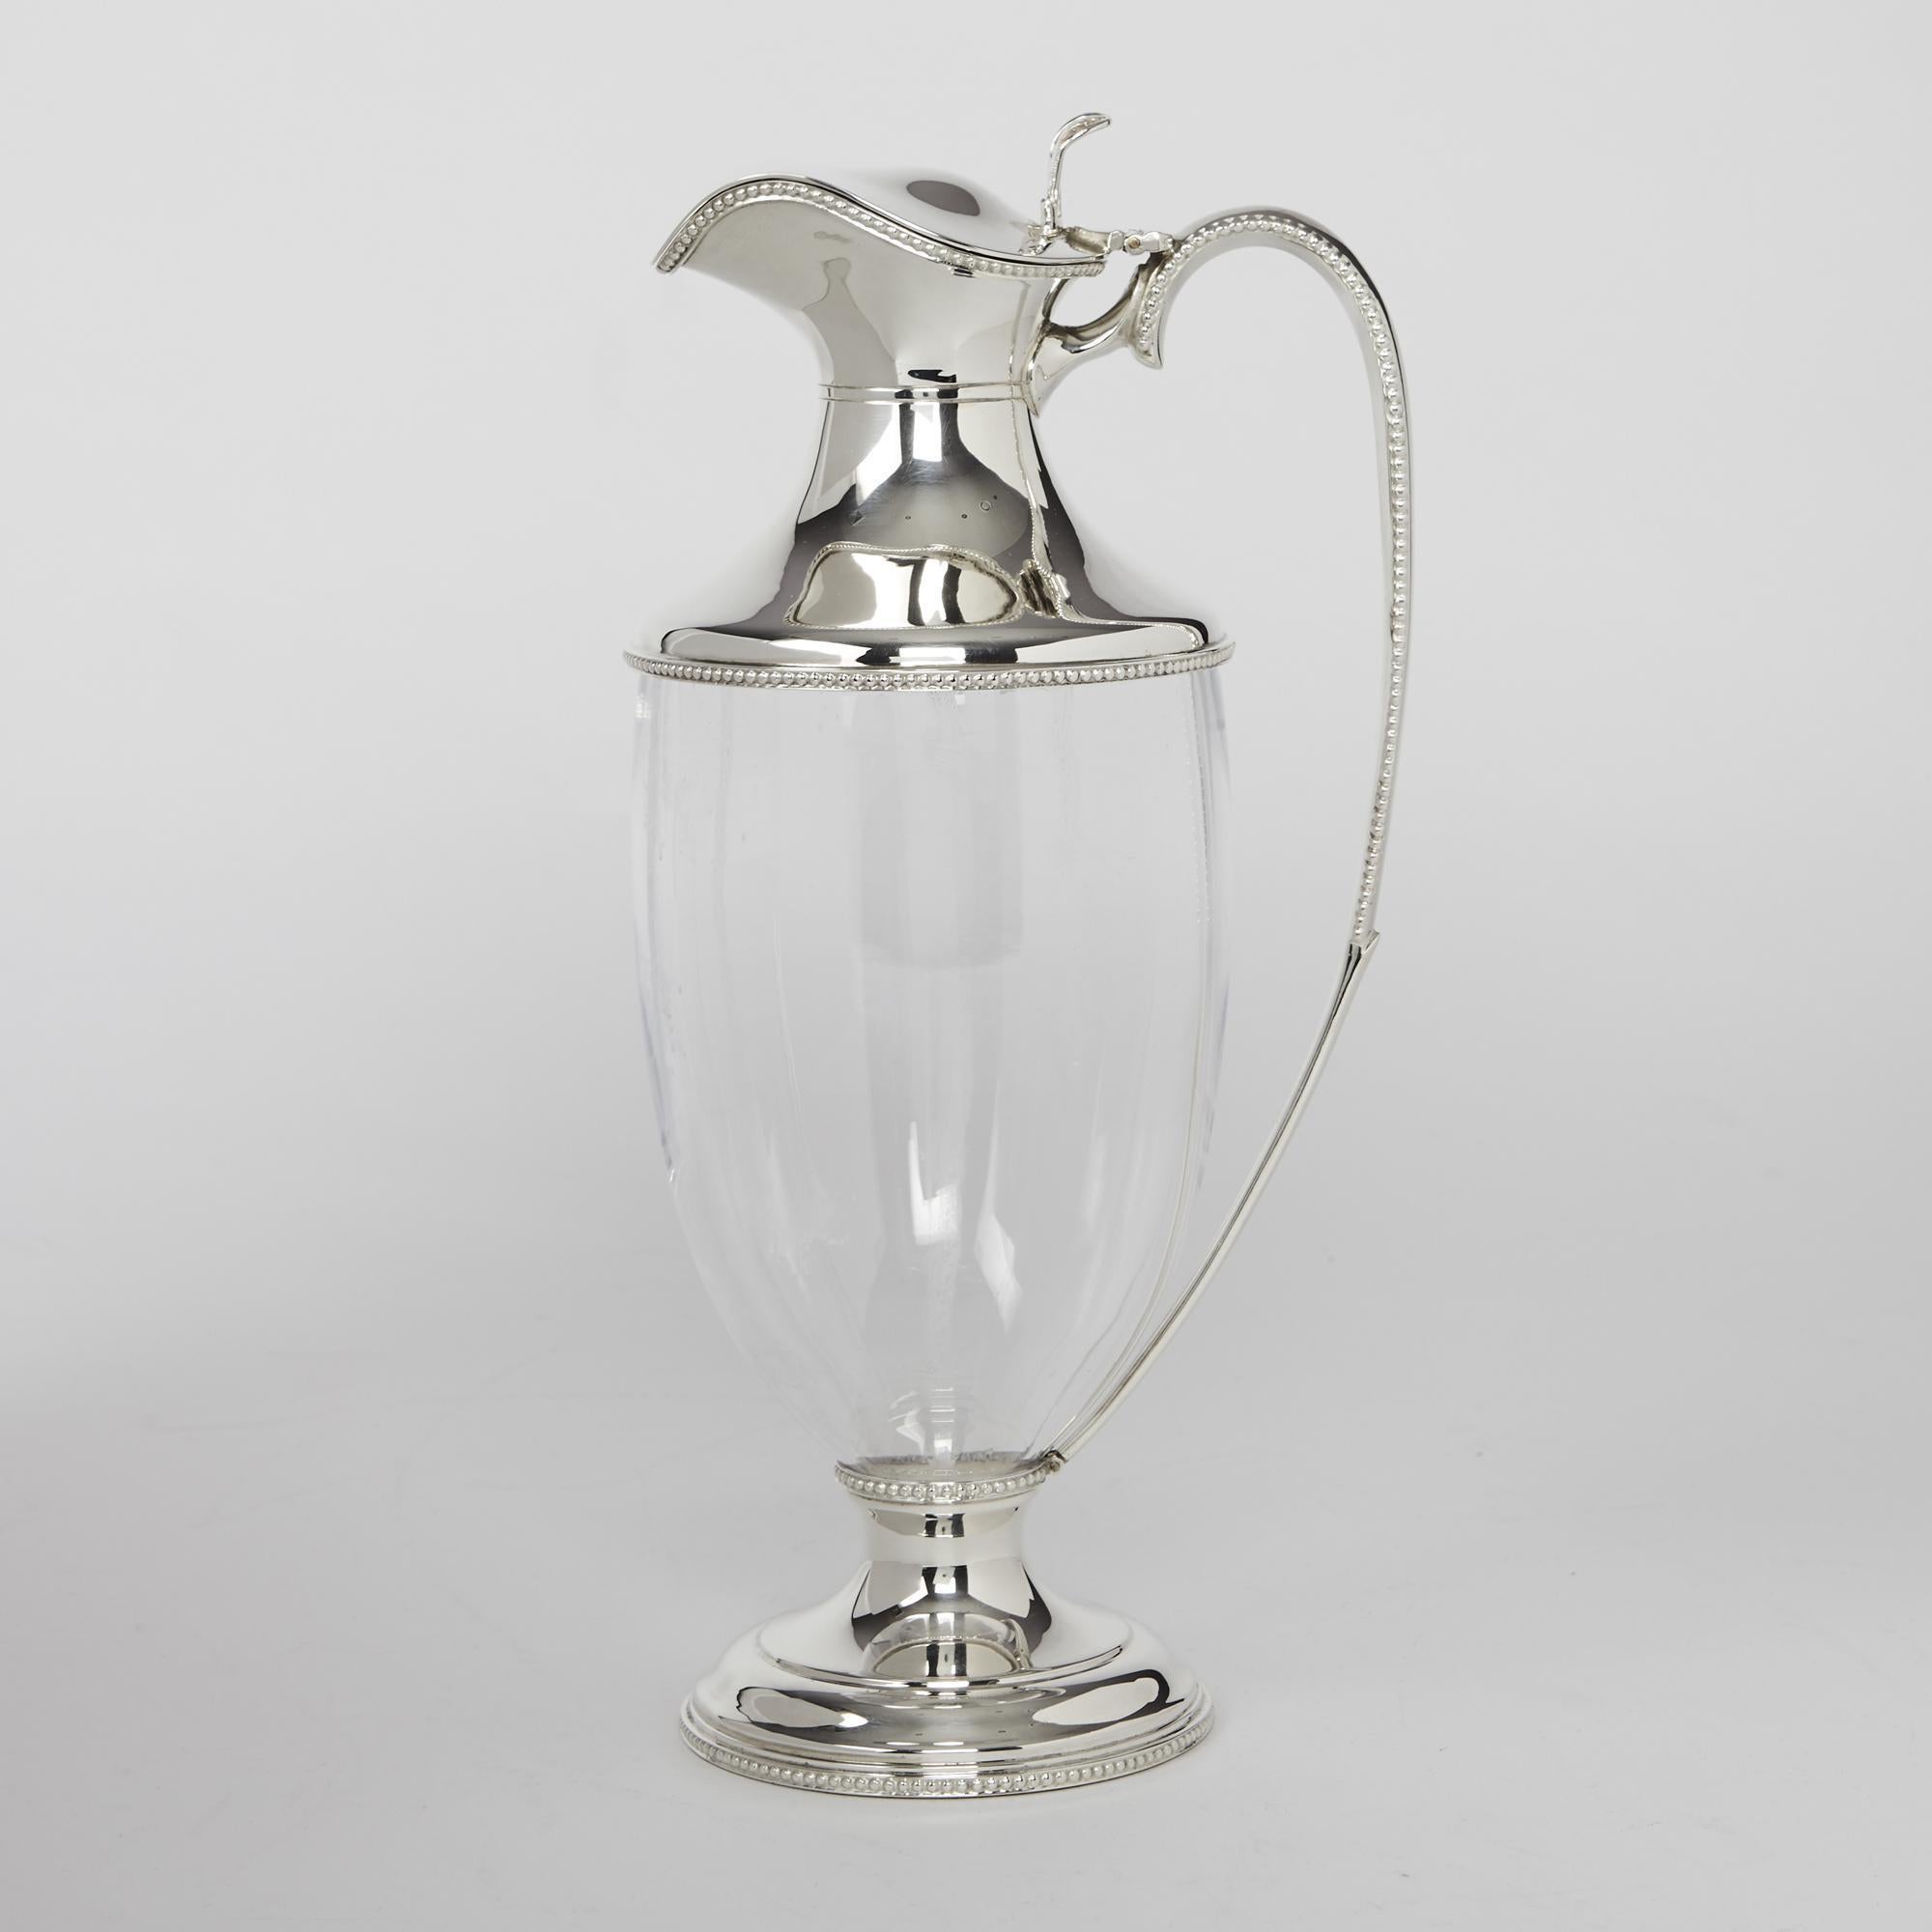 Modern recreation of a neoclassical, Adam-style wine jug with glass body and silver mounts decorated with bead patterns and with a cover featuring an elegant pierced thumbpiece. The plain hand-blown glass body tapers towards a round bead-mounted